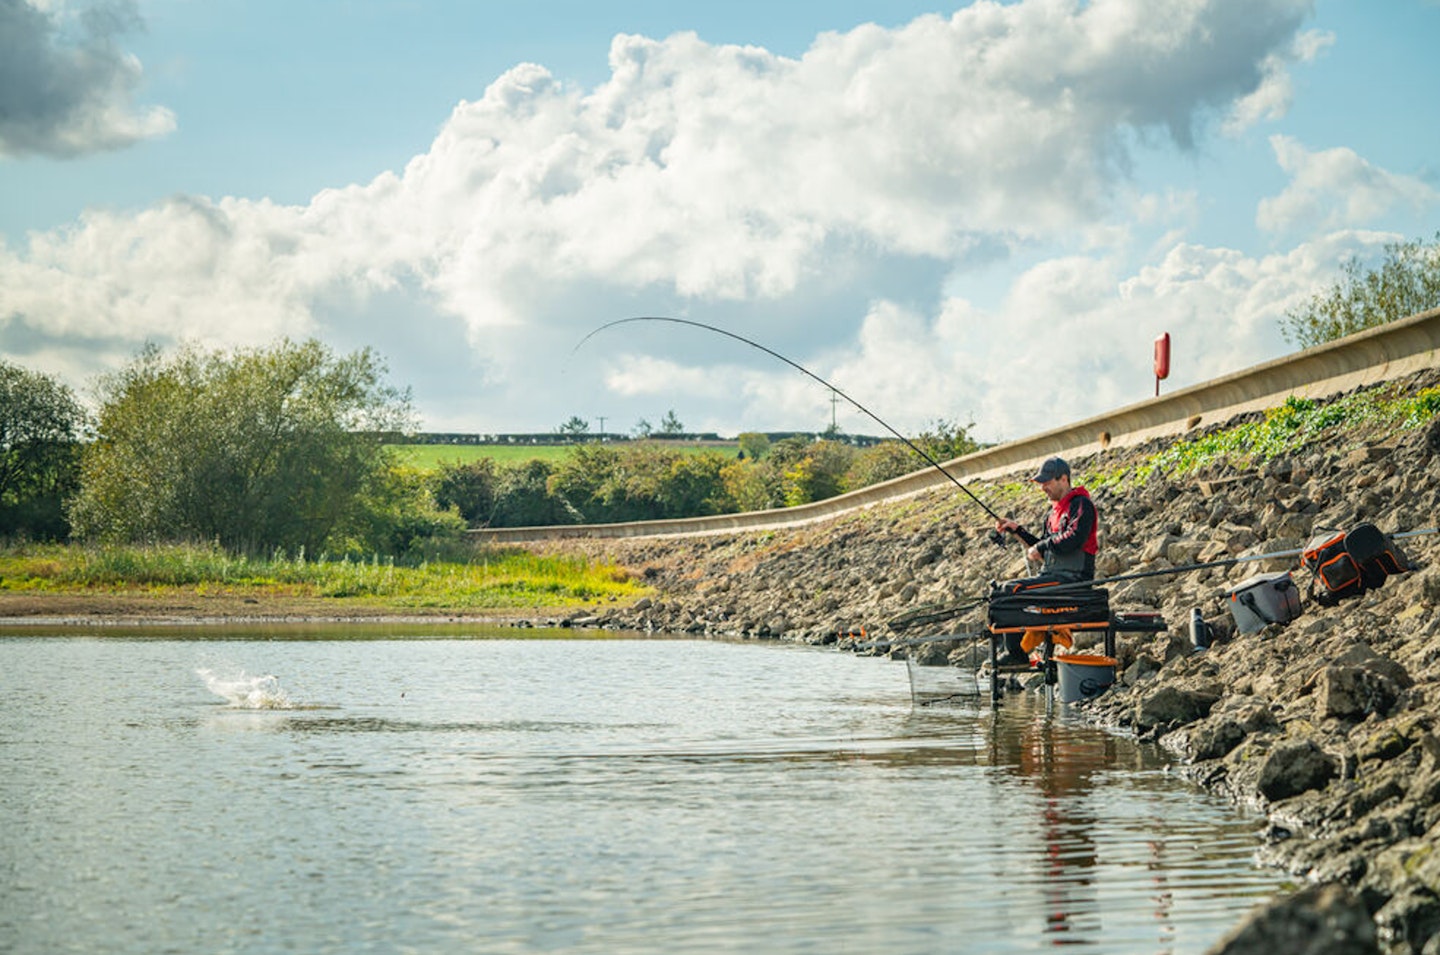 "We expect the venue to be a hit with local anglers"